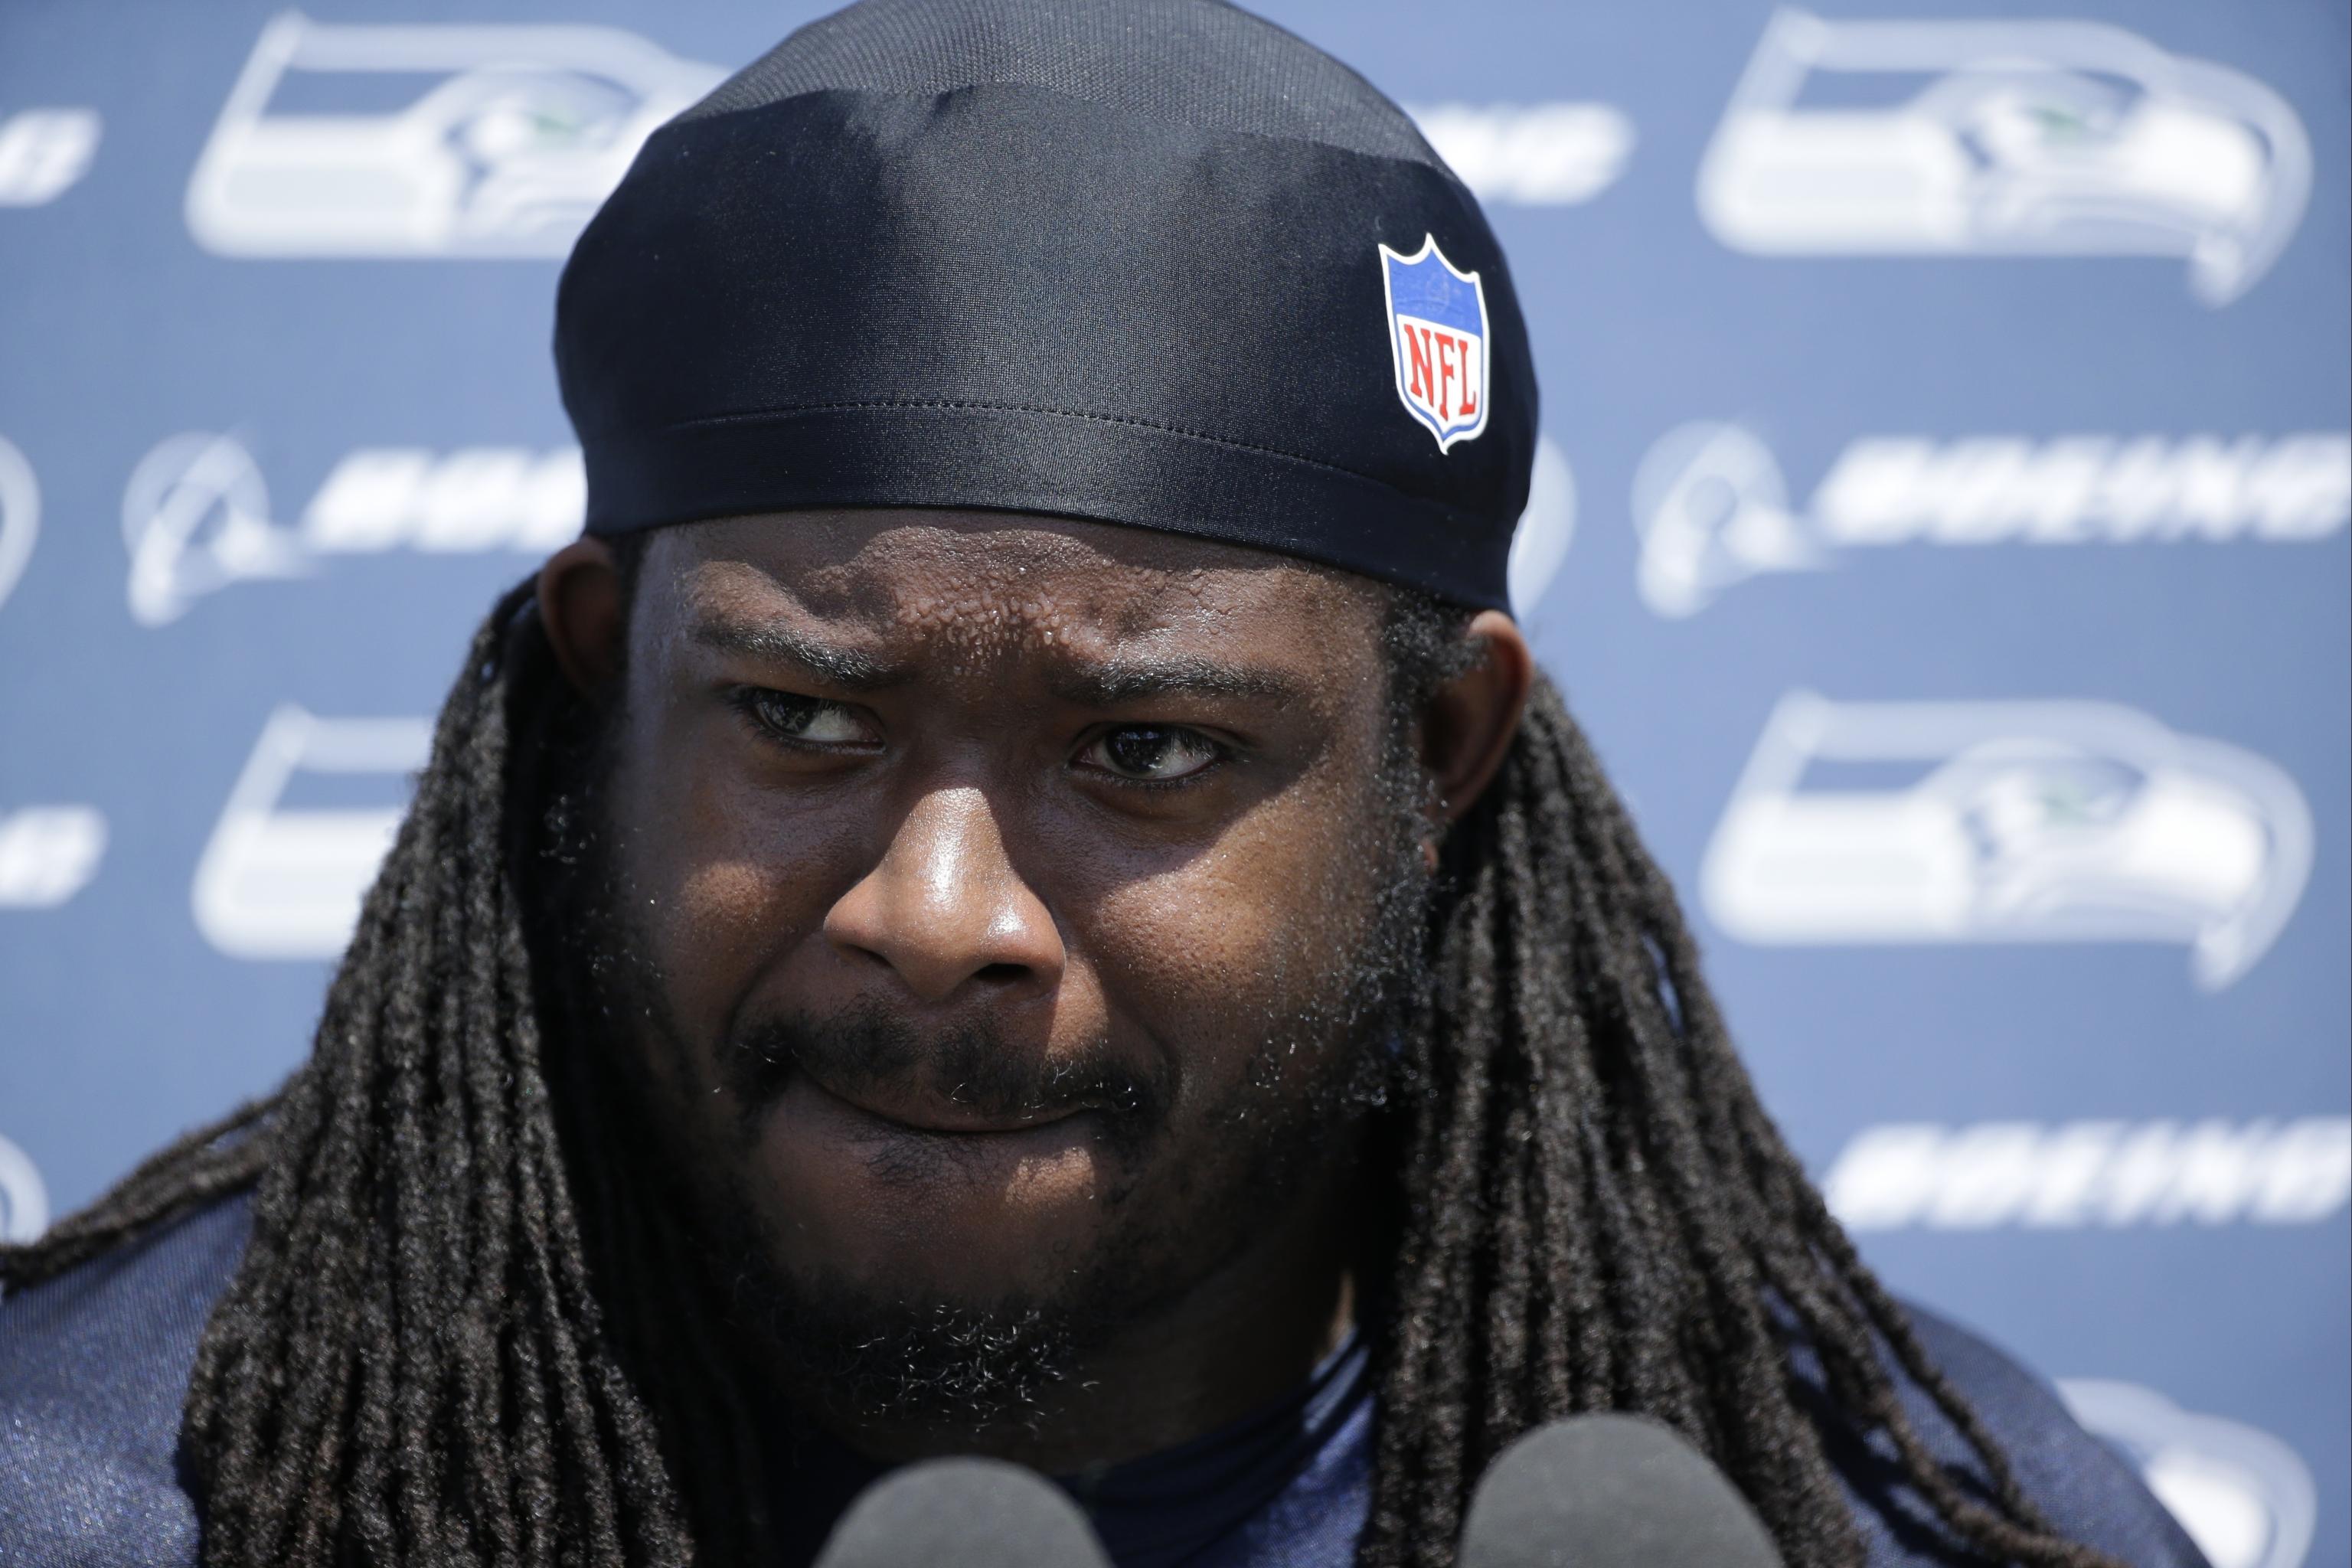 Eddie Lacy just made $55,000 from the Seahawks for weighing 253